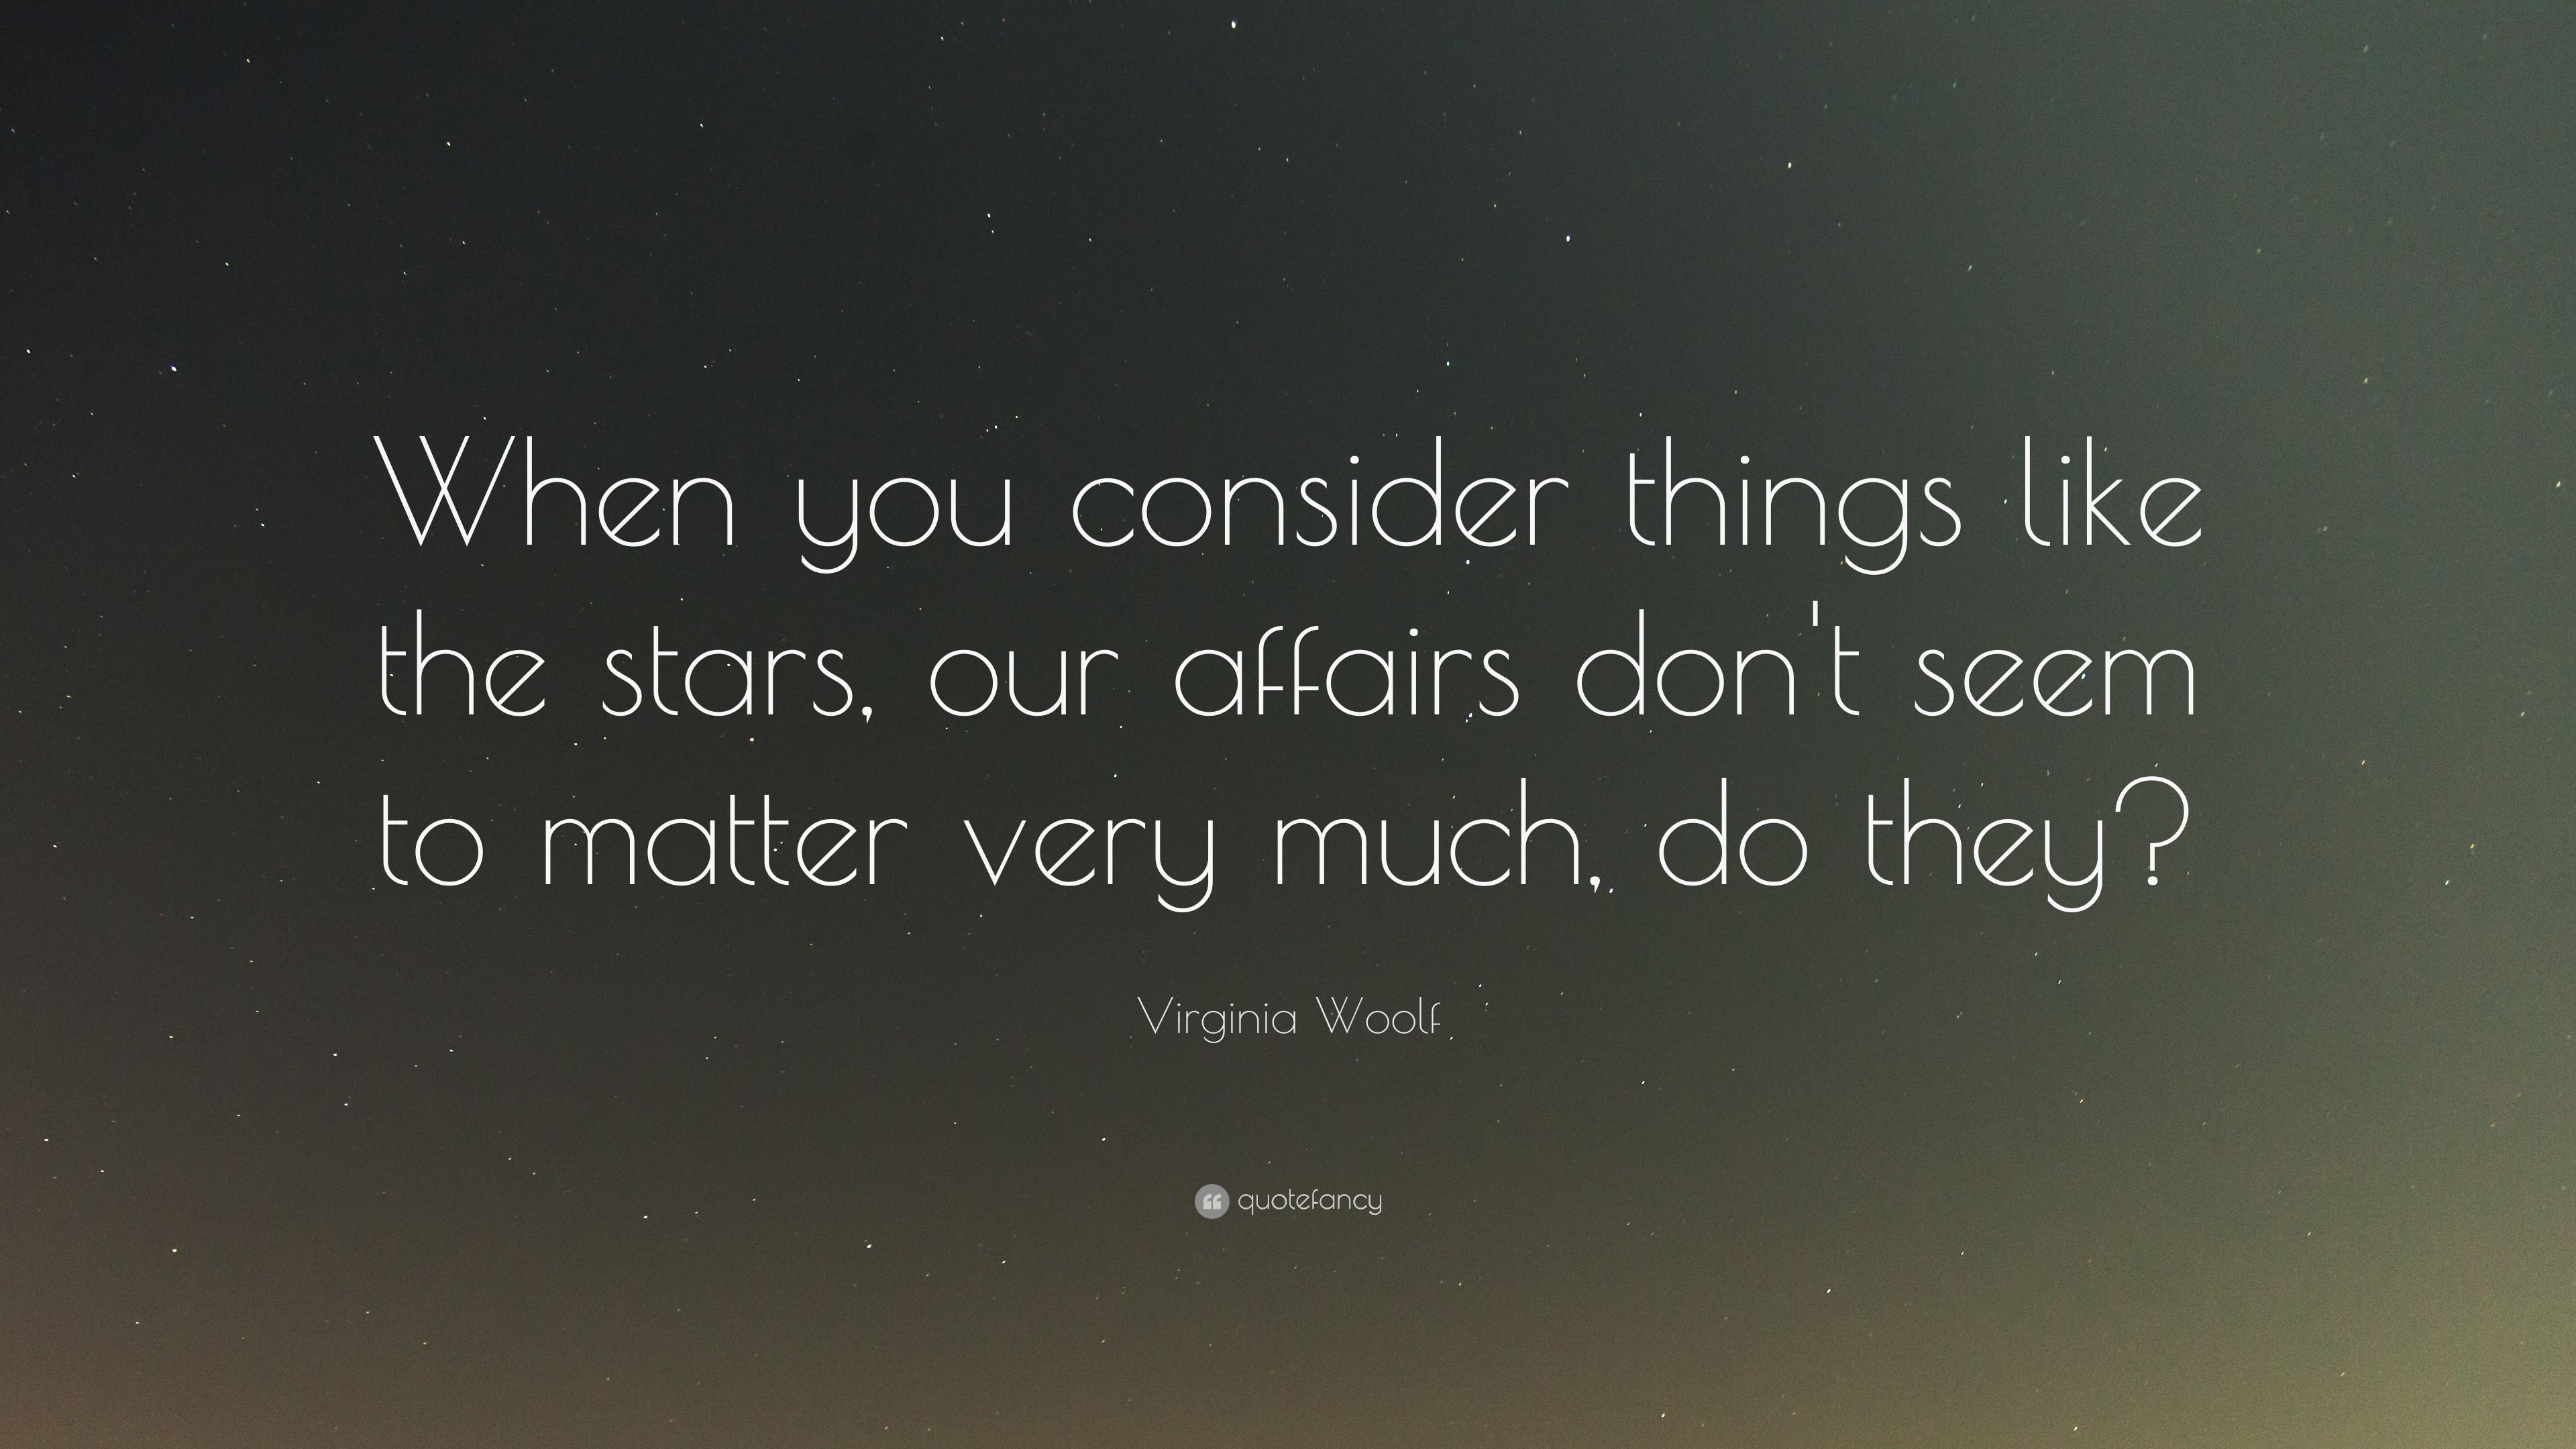 Virginia Woolf Quote: “When you consider things like the stars